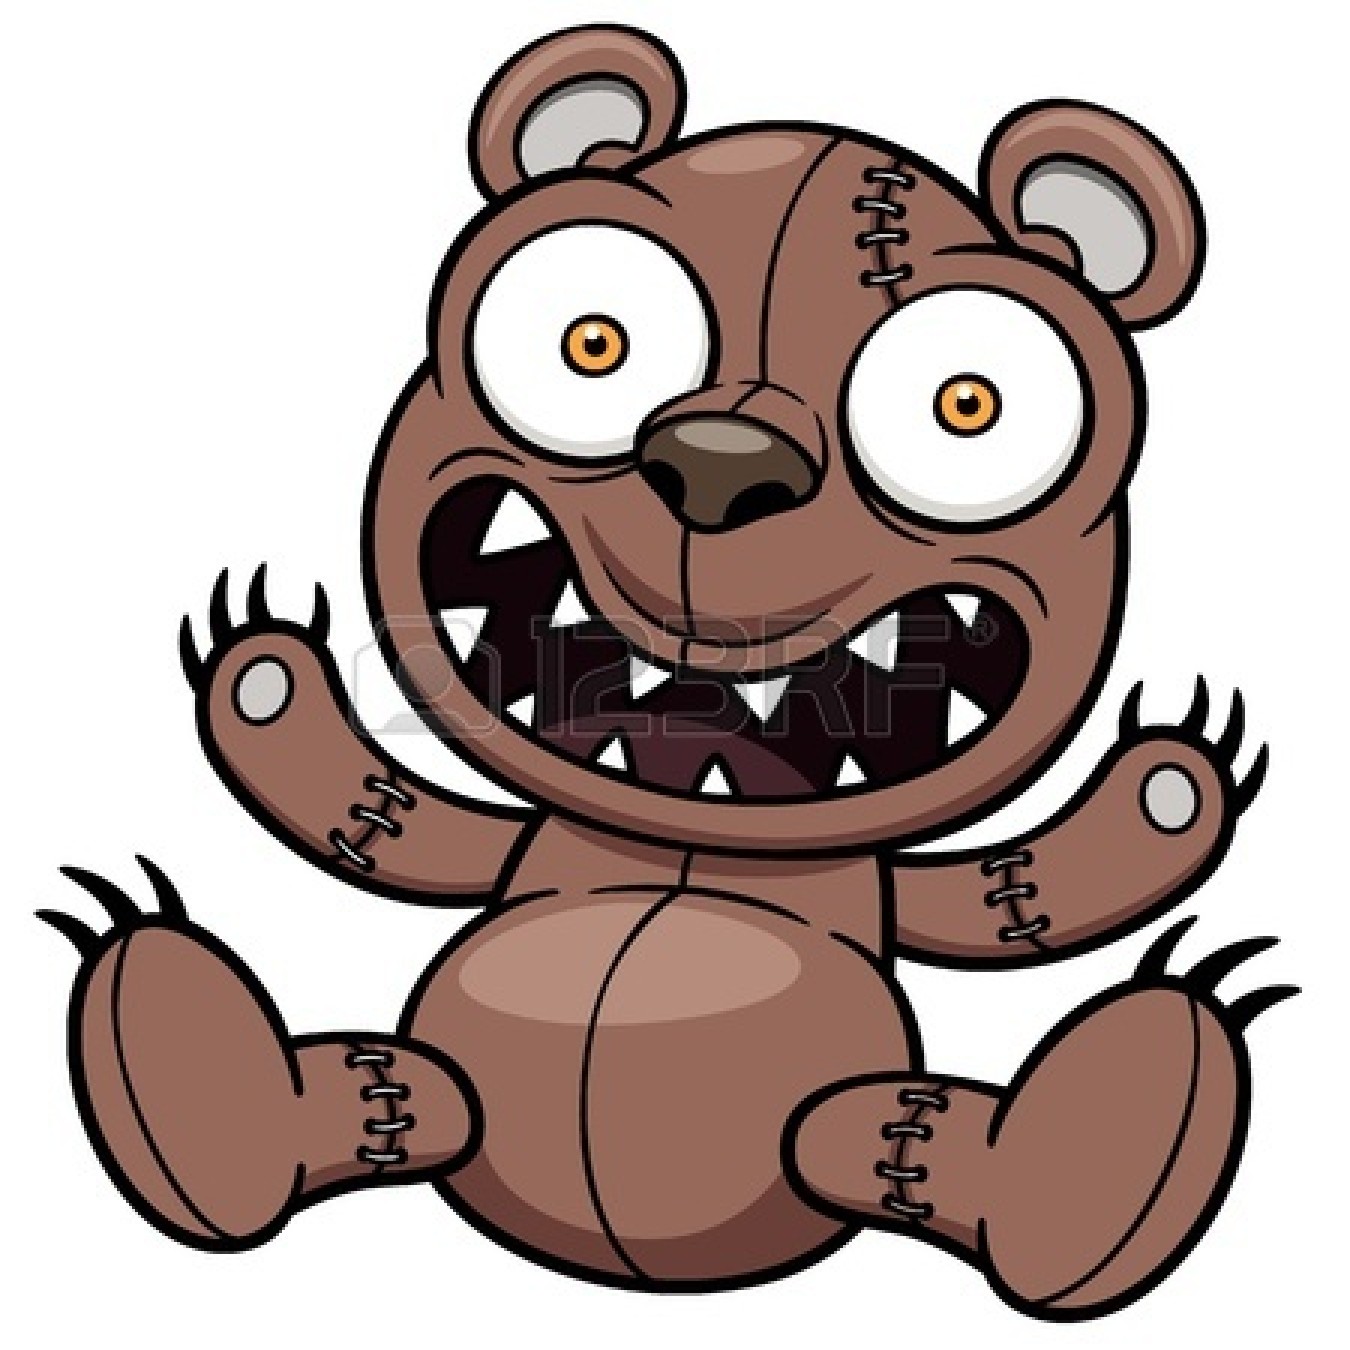 Clip Arts Related To : cartoon grizzly bear. view all Scared Bear Cliparts)...